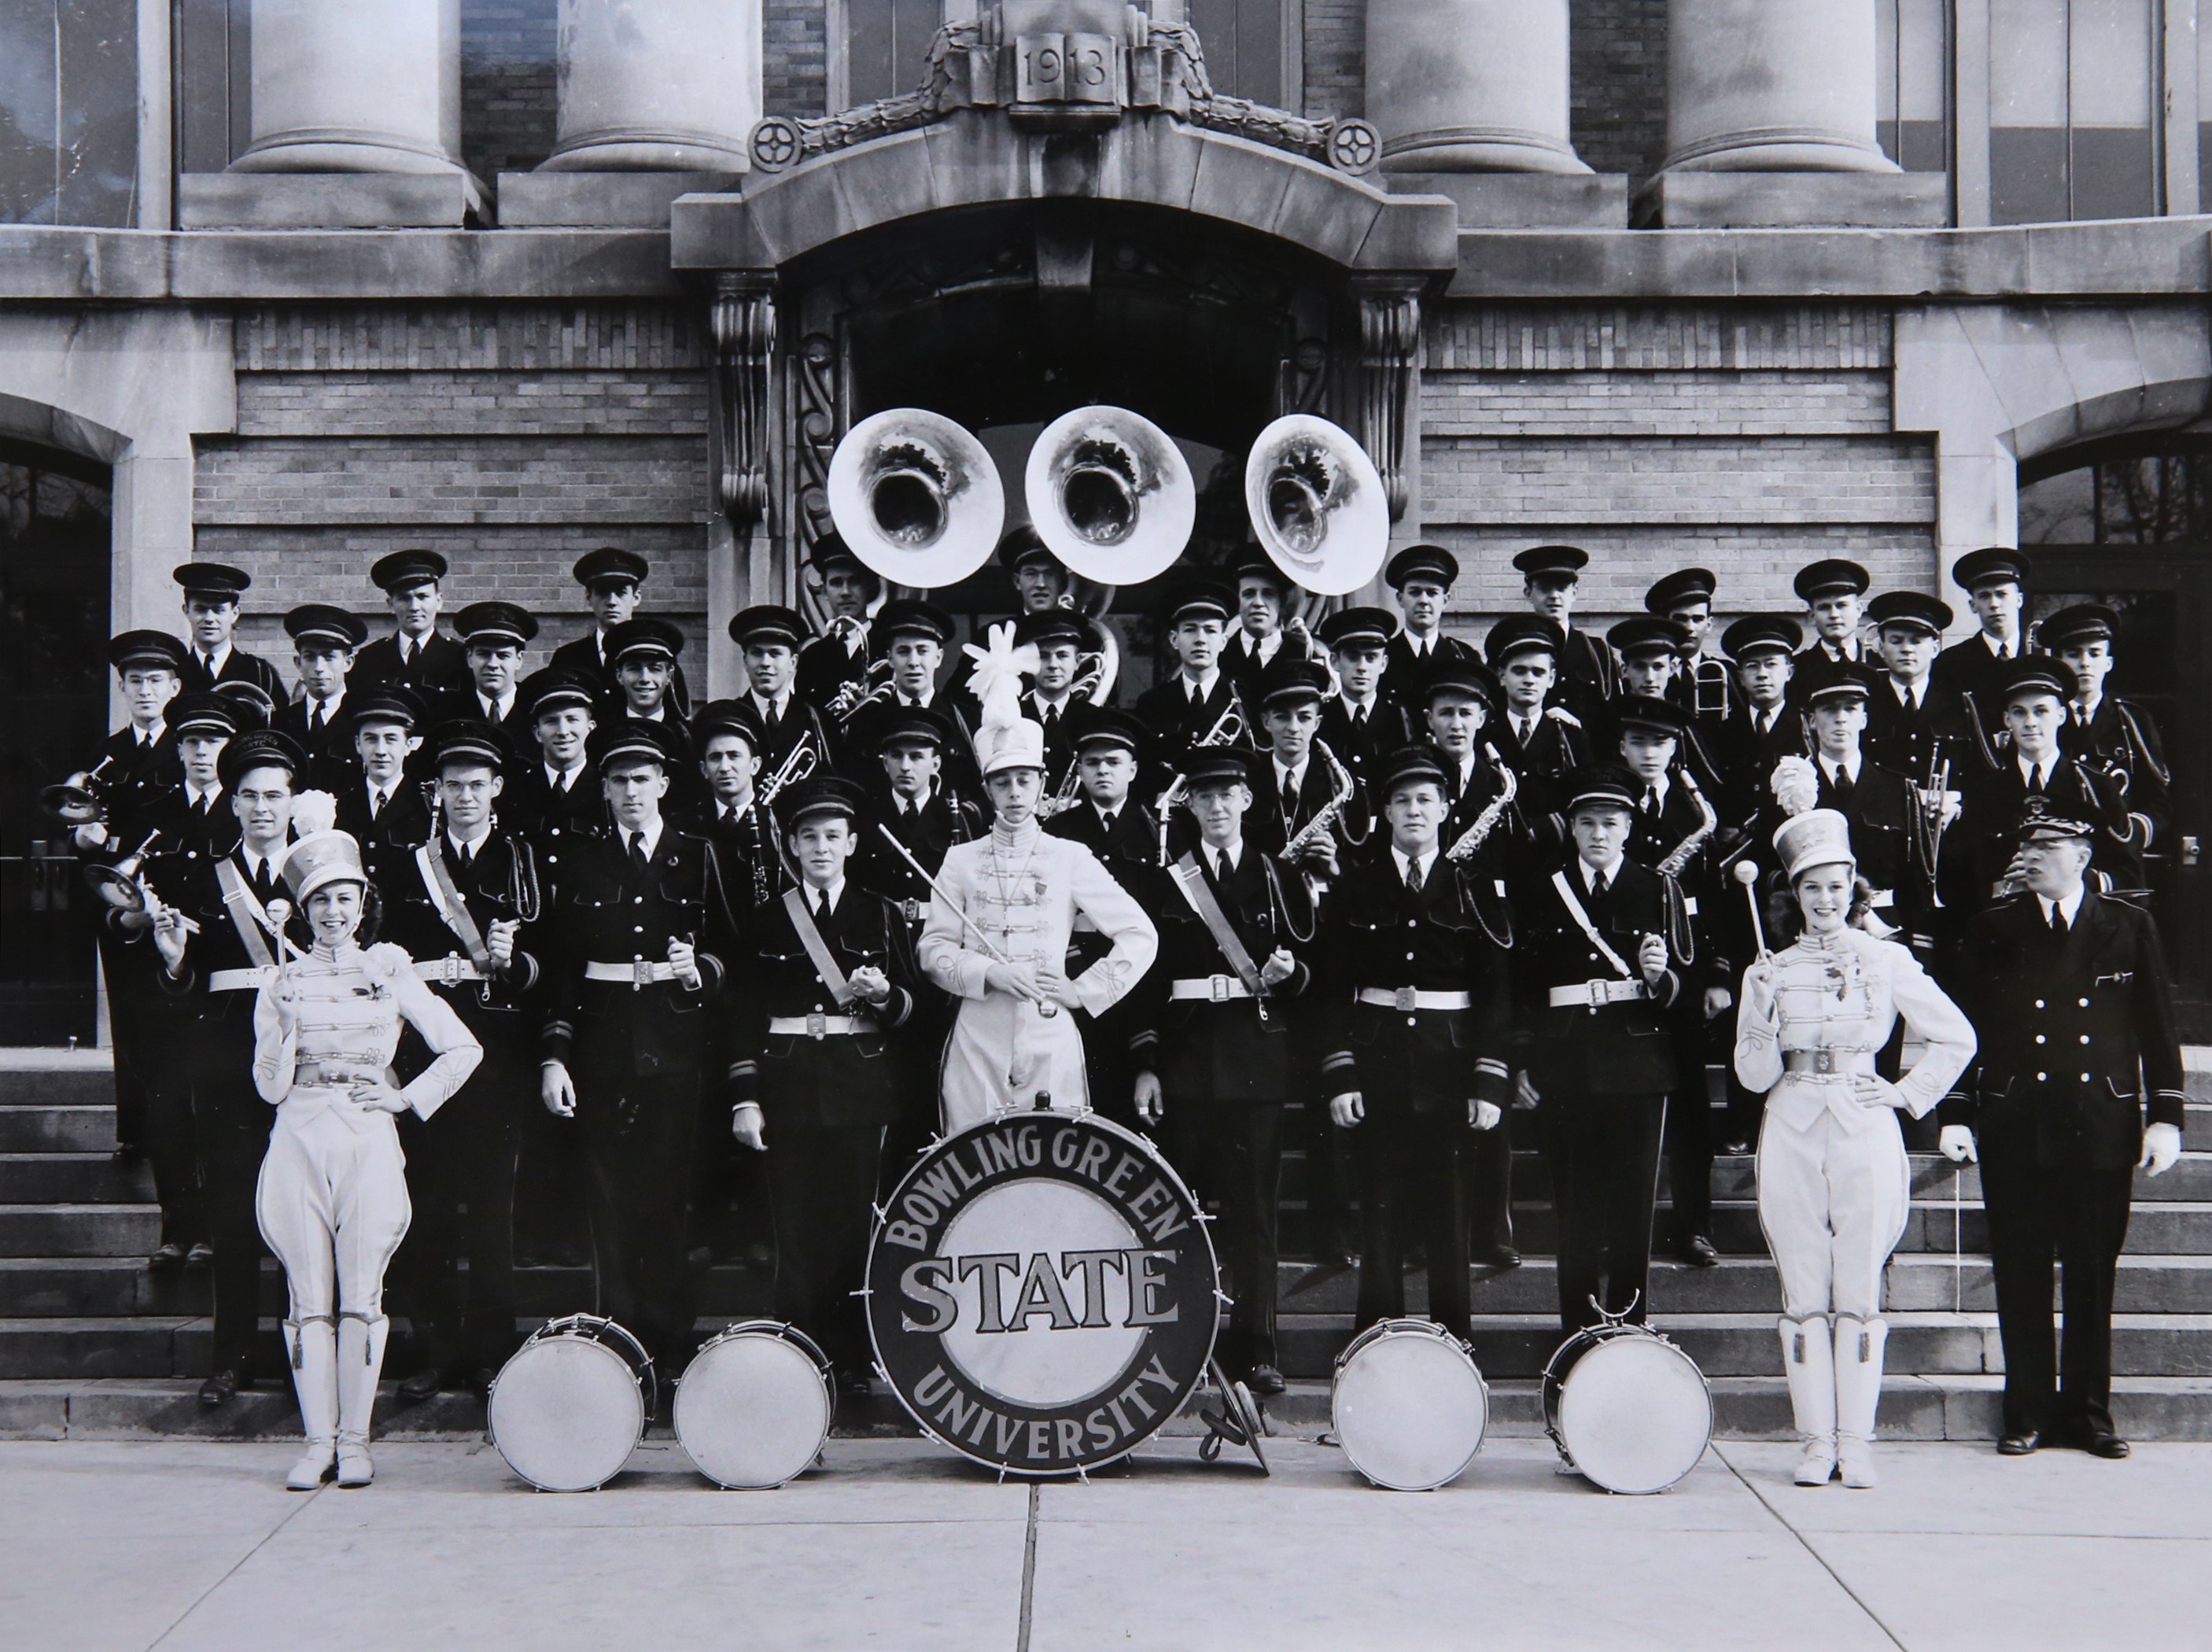 The BGSU marching band group photo in 1941